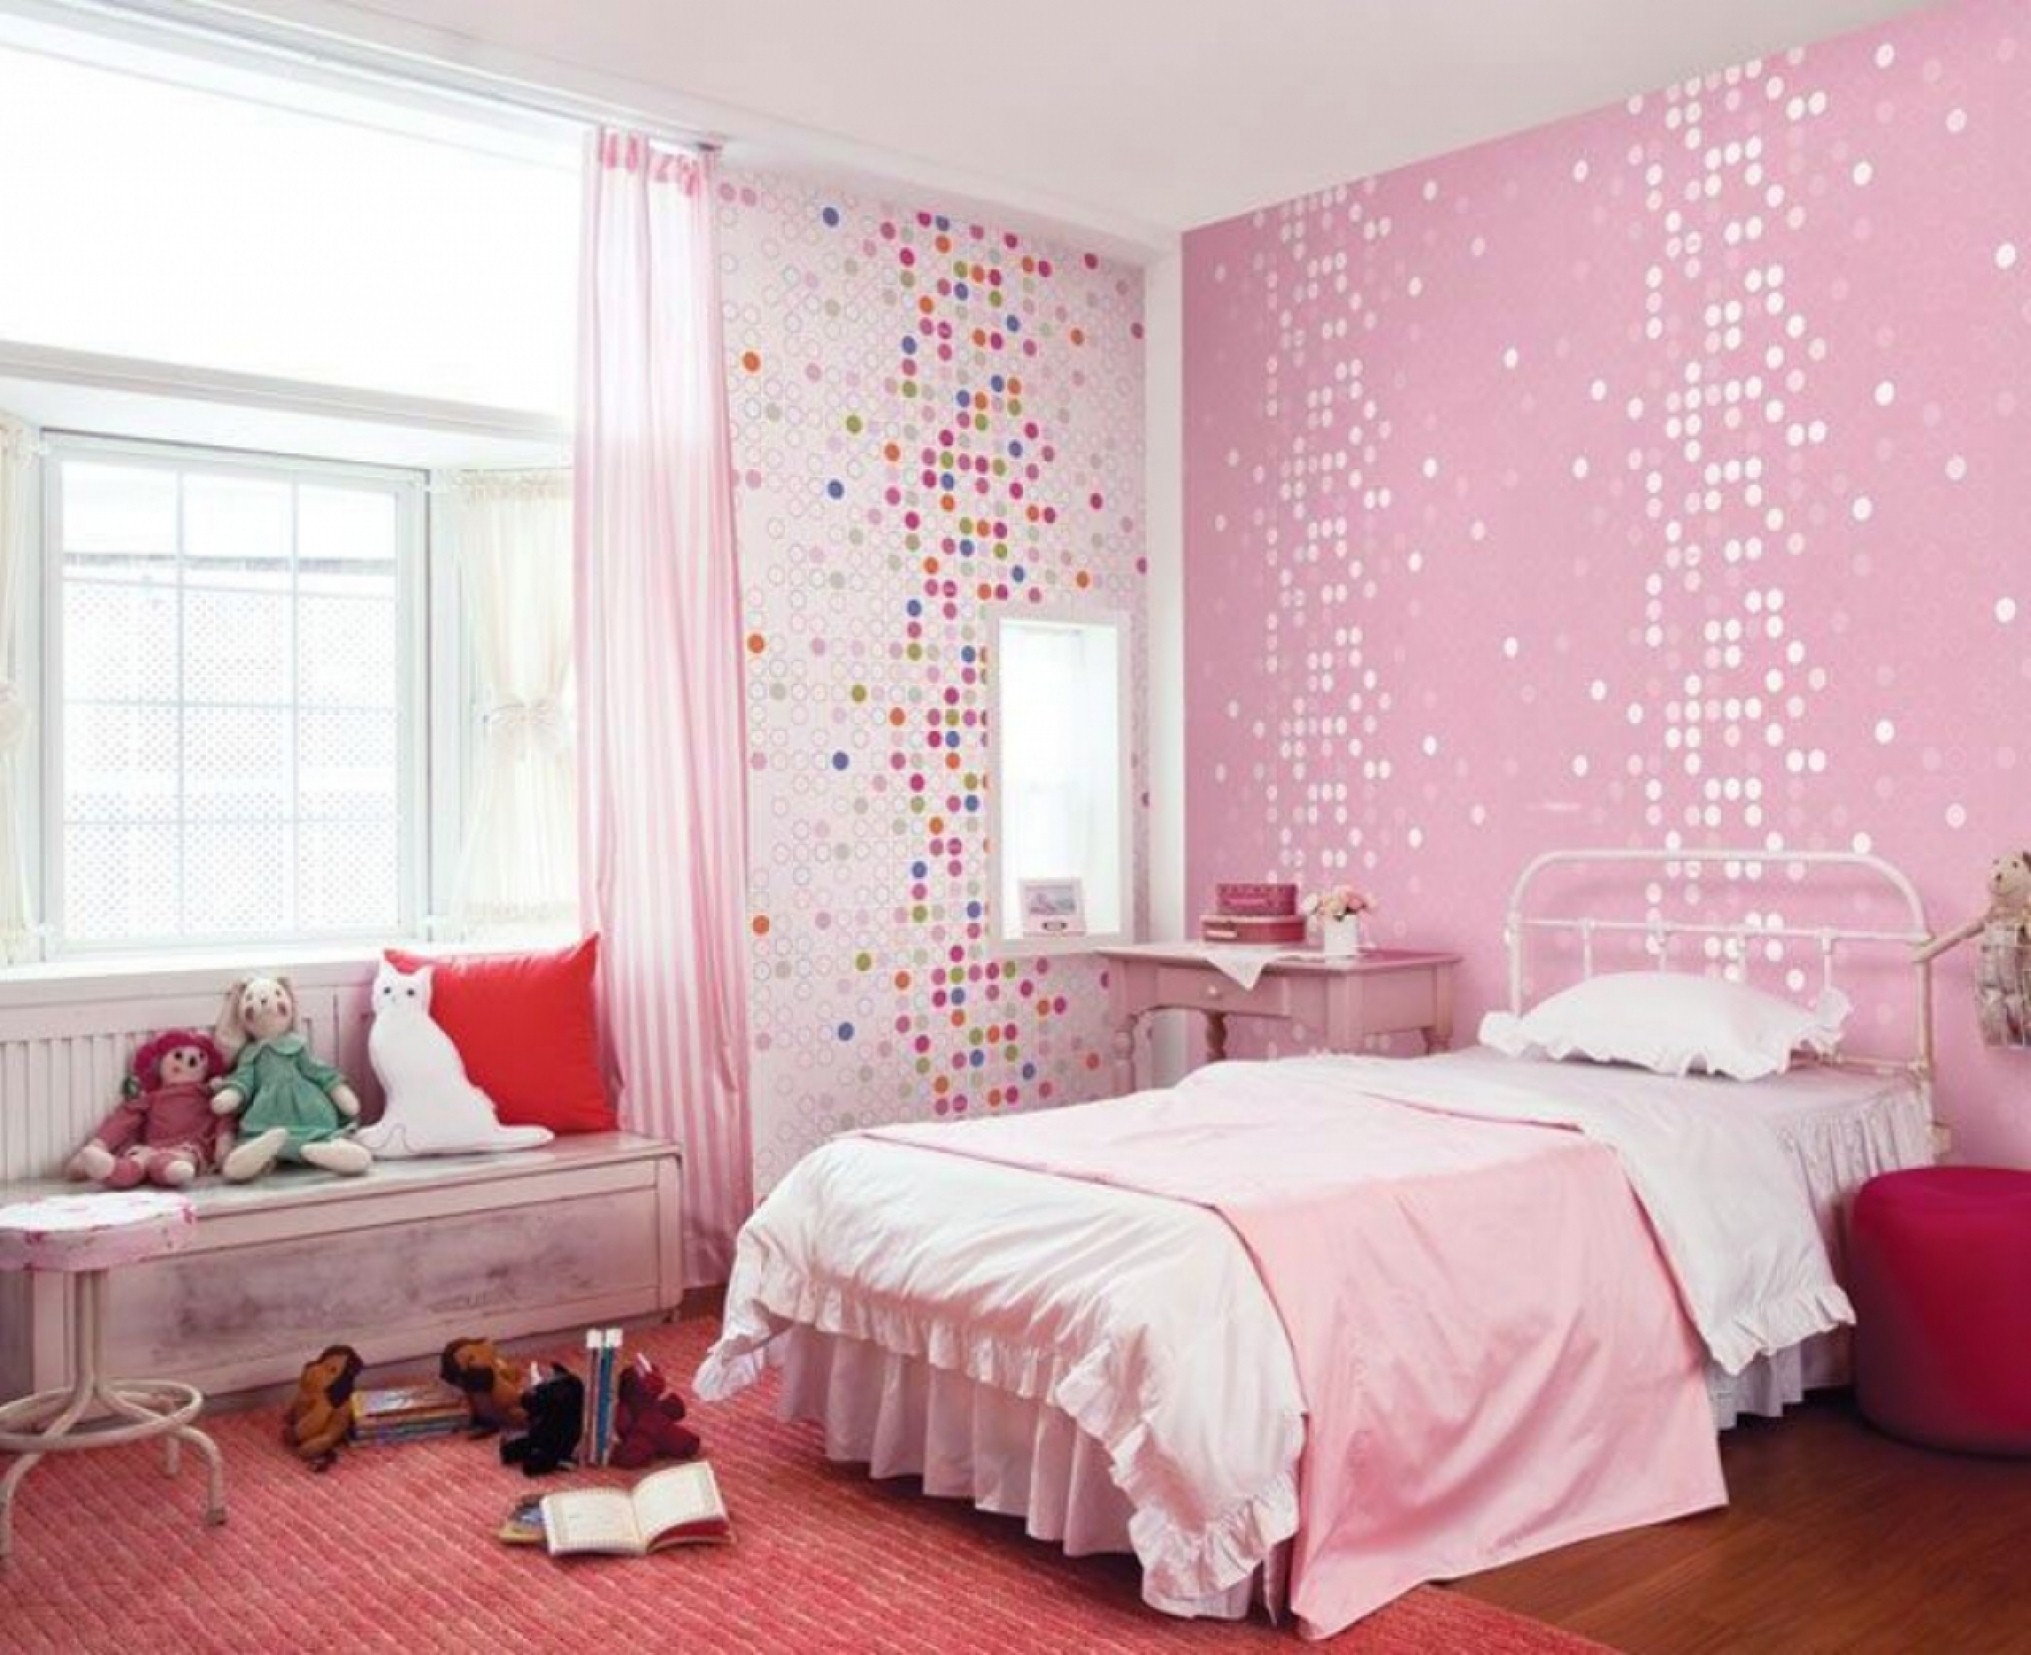 2031x1655 Bedroom Historic Pink Teenage Girls Room Interior Design With Windows Bay  Nook And Artistic Mosaic Wallpaper ...